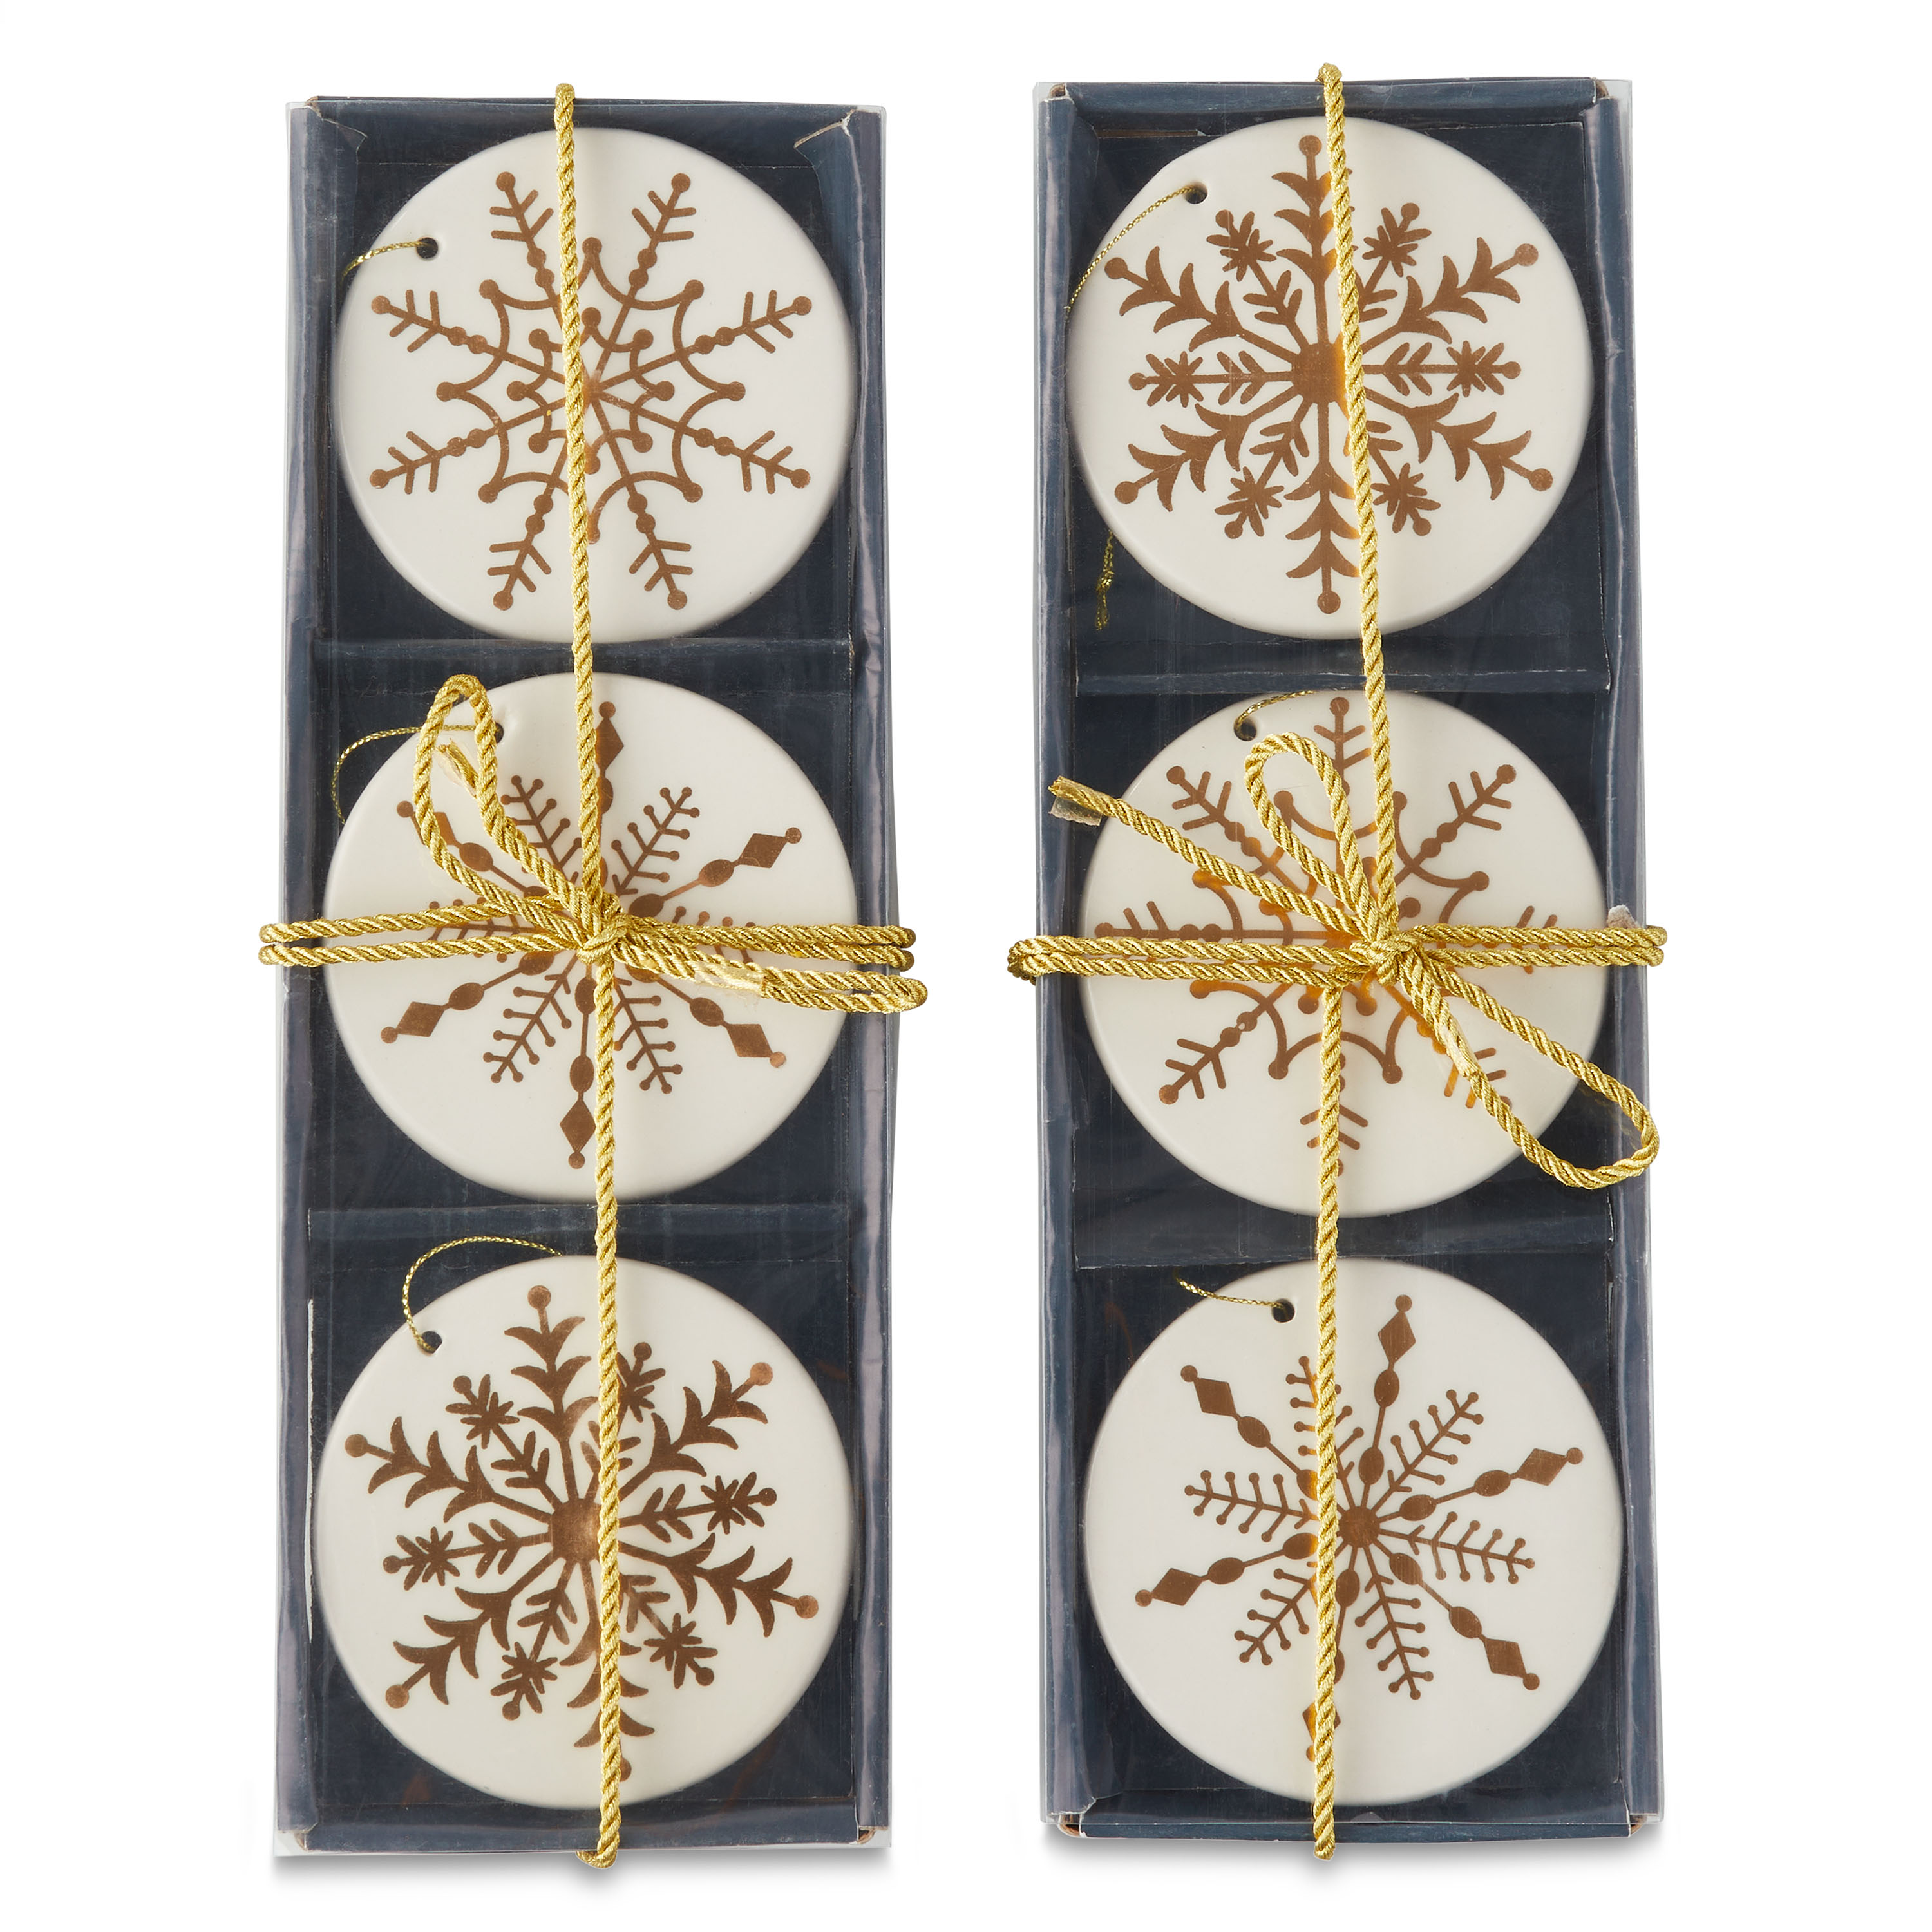 Holiday Time Round Christmas Ornamets with Gold Snowflake, 2 Pack - 6 Ornaments - image 1 of 6